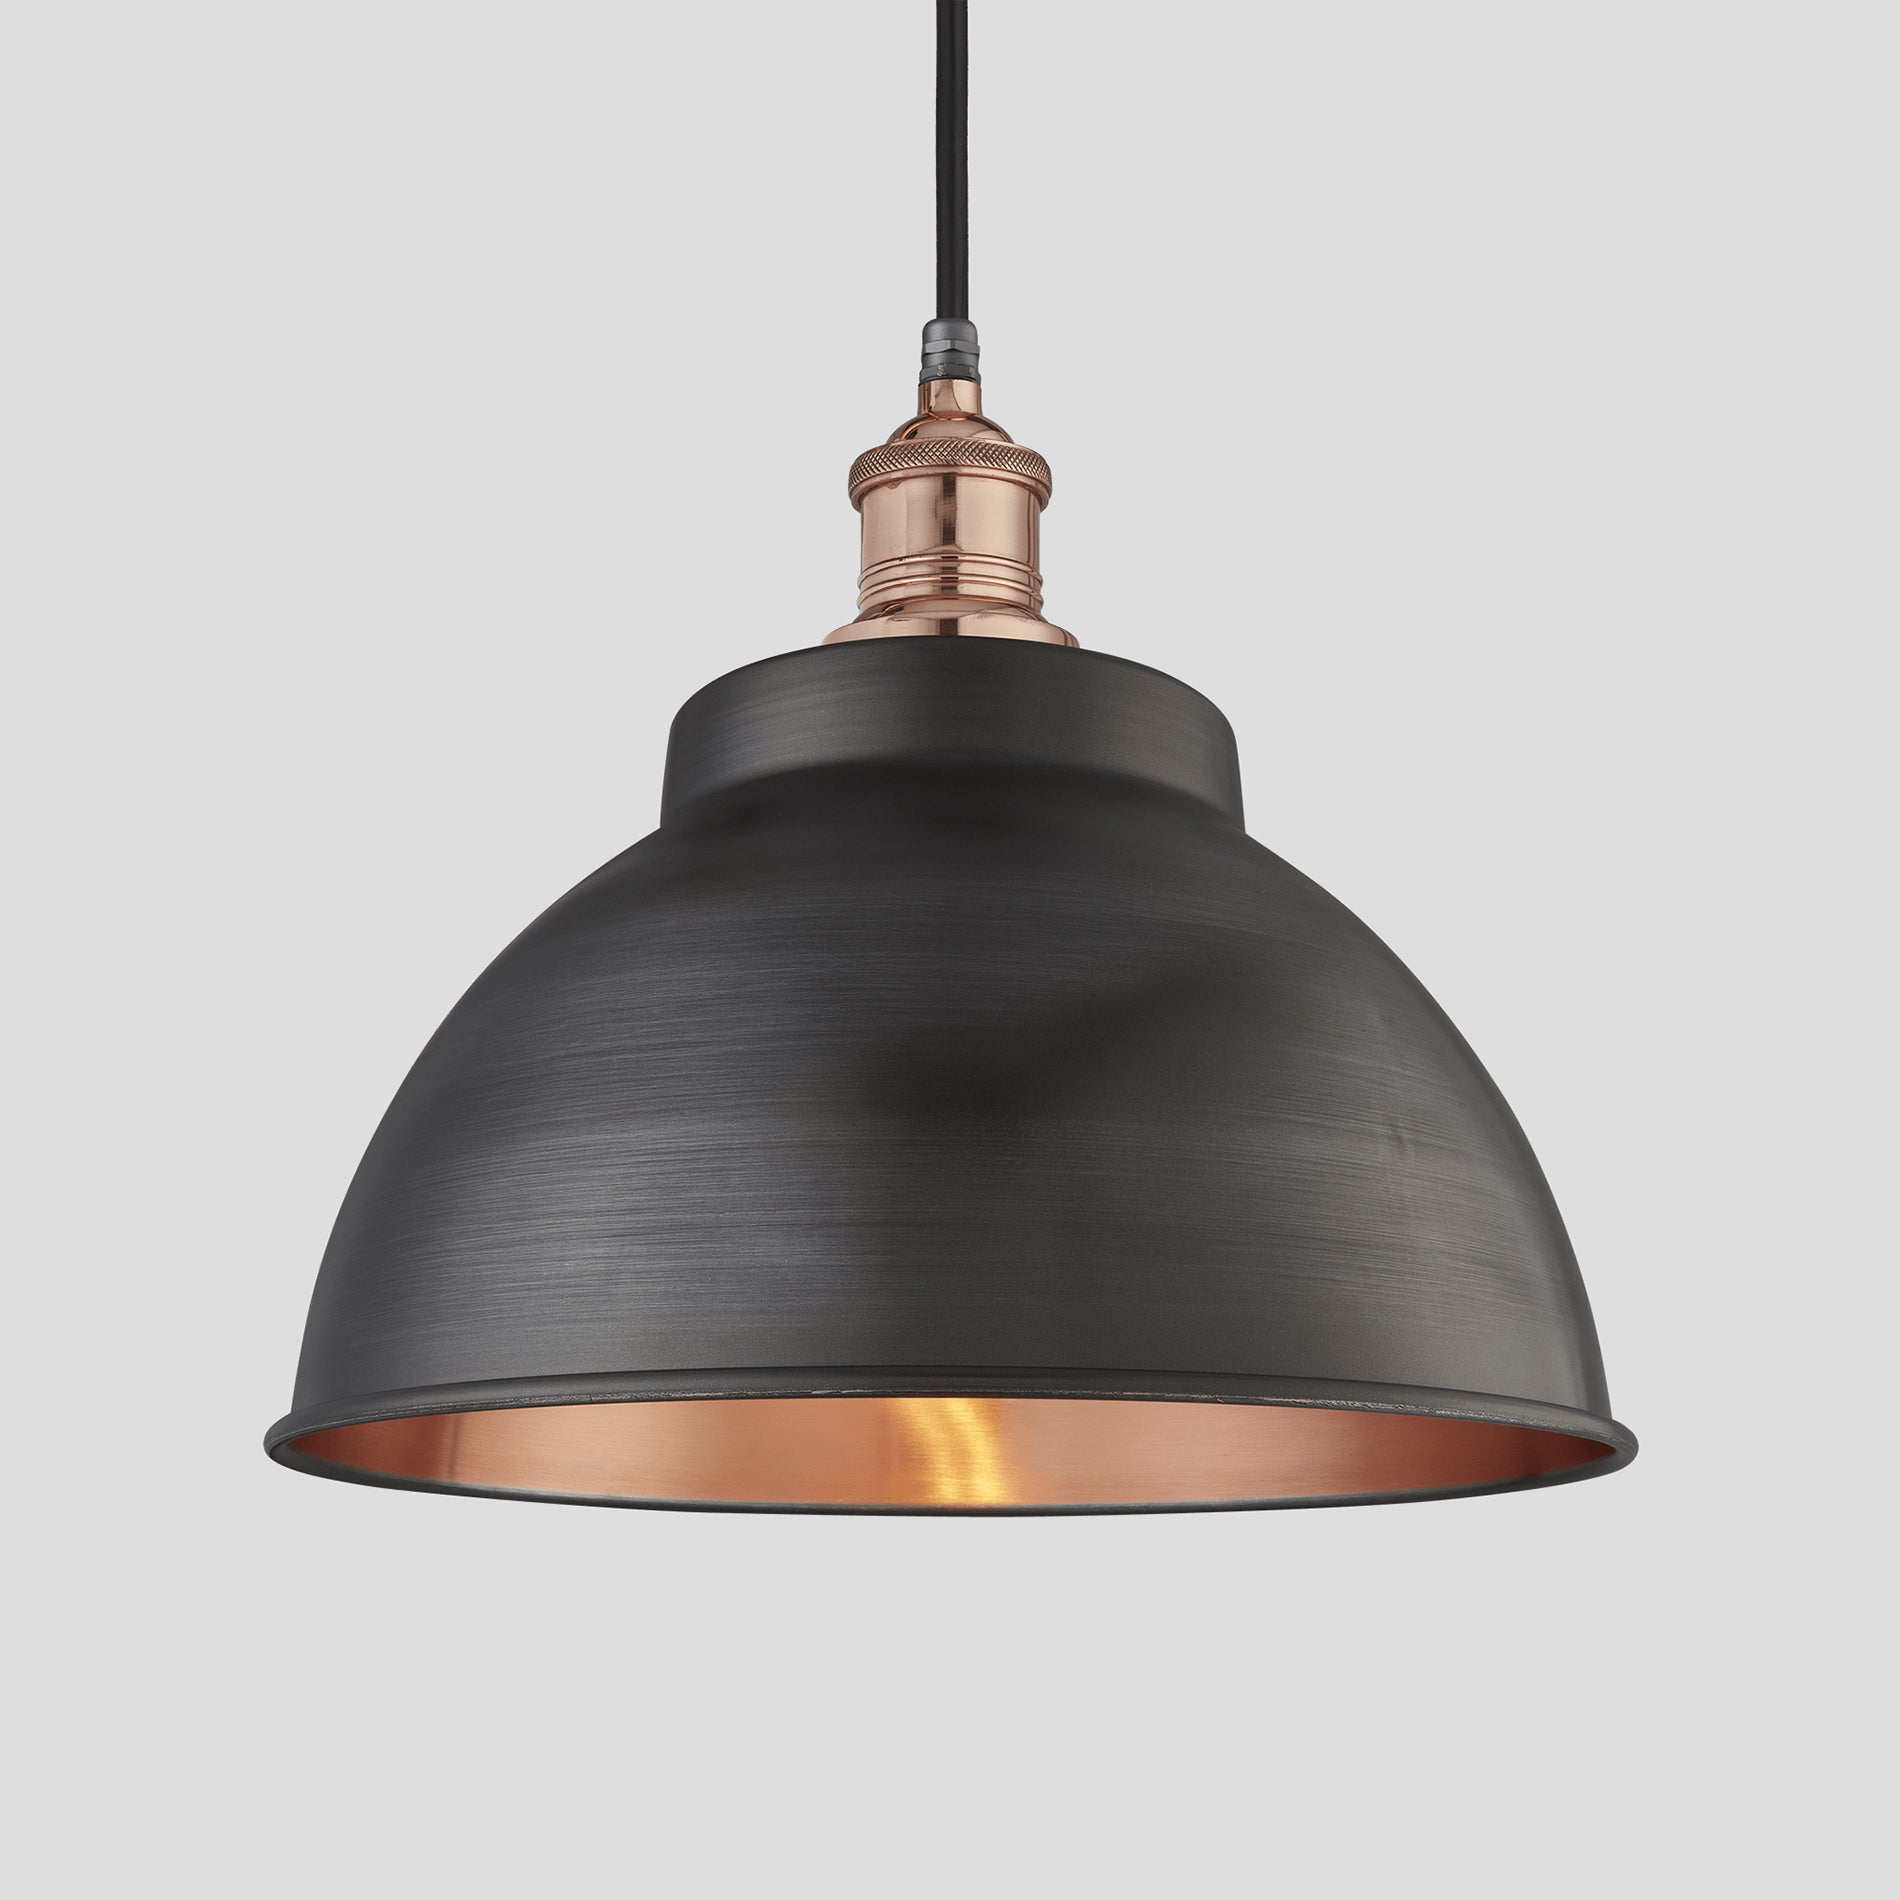 Brooklyn Outdoor & Bathroom Dome Pendant - 13 Inch - Pewter & Copper Industville BR-IP65-DP13-CP-CH-GLG